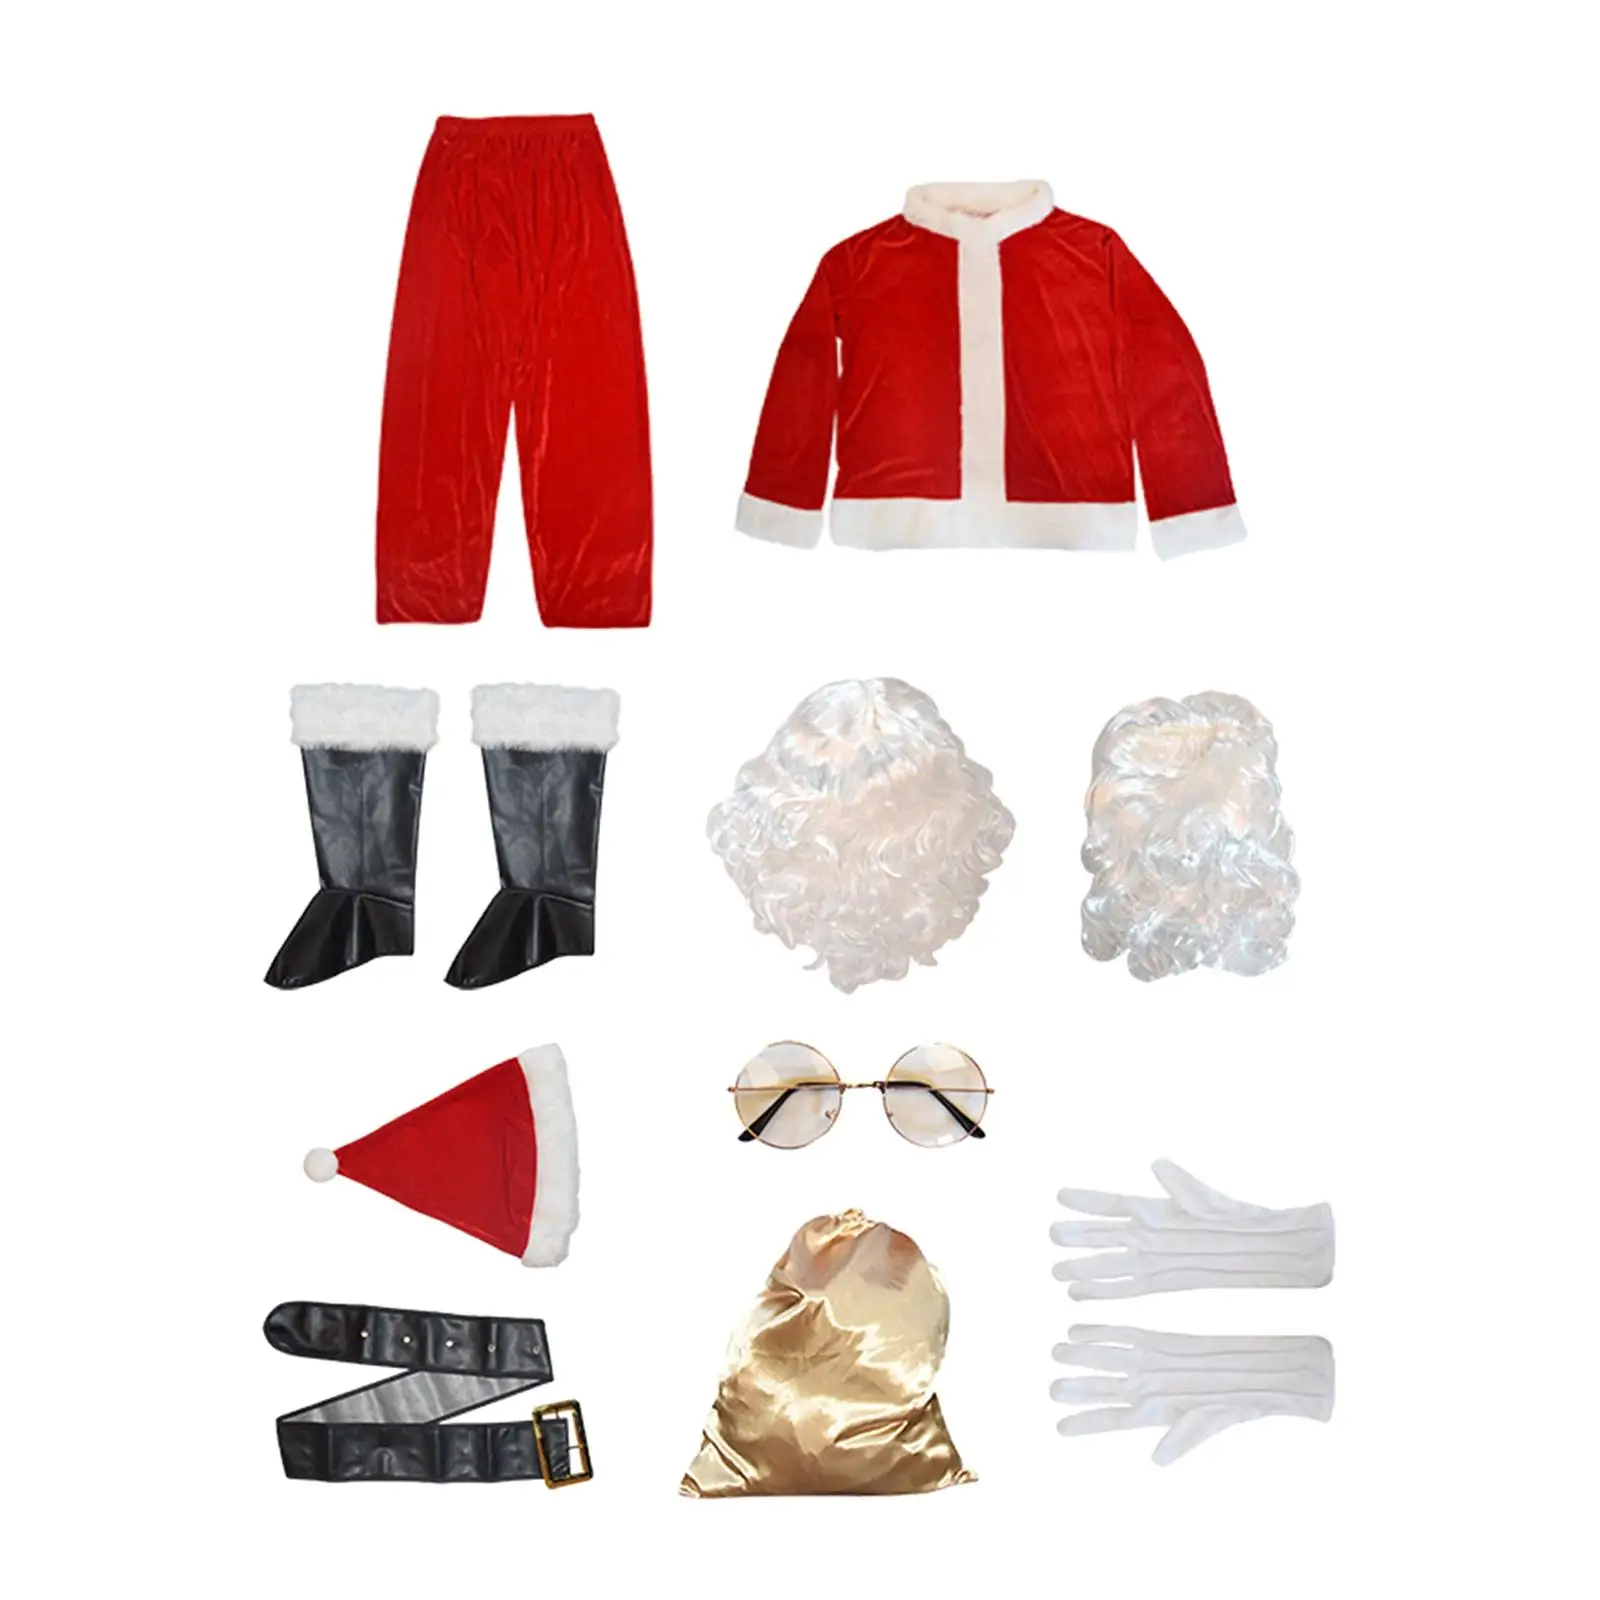 

10Pcs Santa Costume for Men, Christmas Clause Outfit Wig Beard Velvet for Clothing Accessory, Holidays